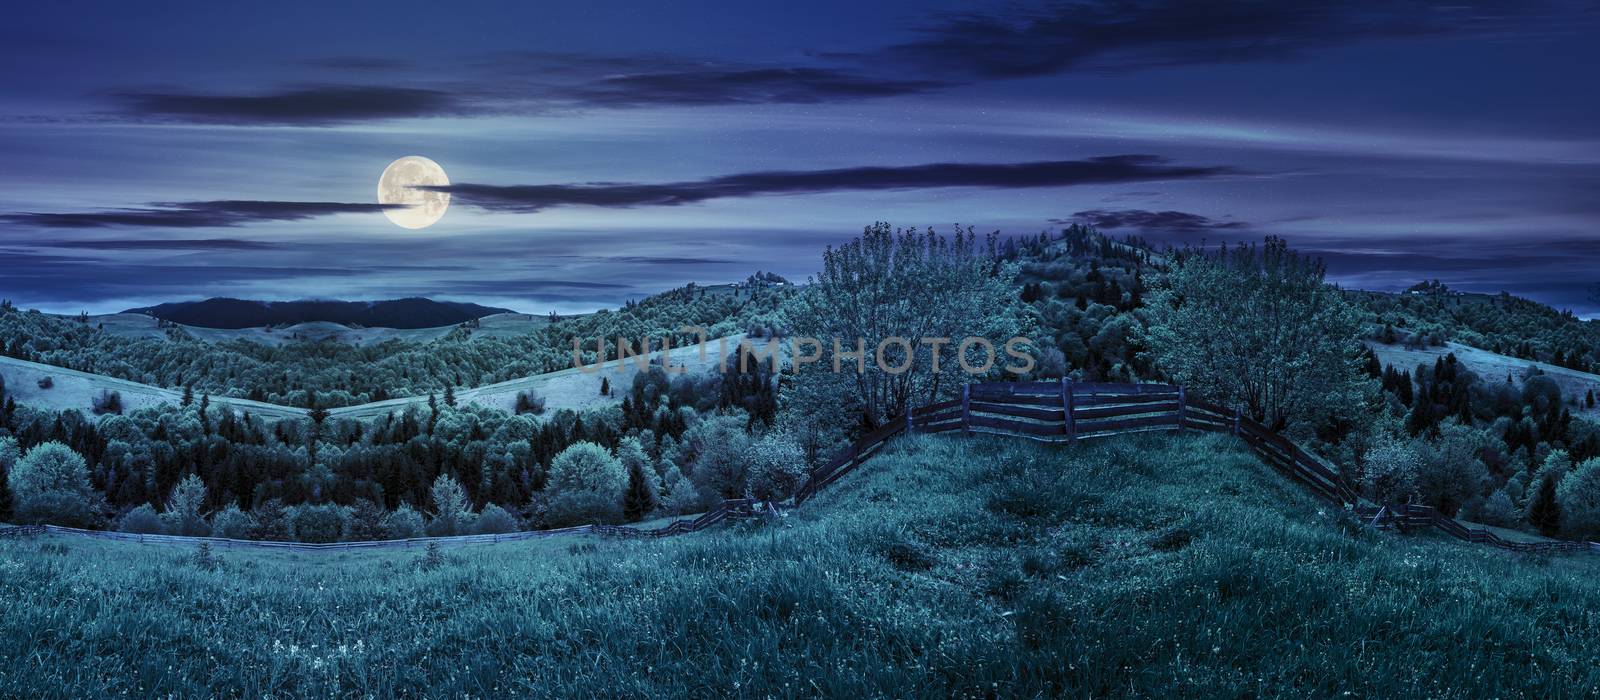 summer panorama landscape. fence on the hillside meadow  near the forest in fog on the mountain at night in full moon light